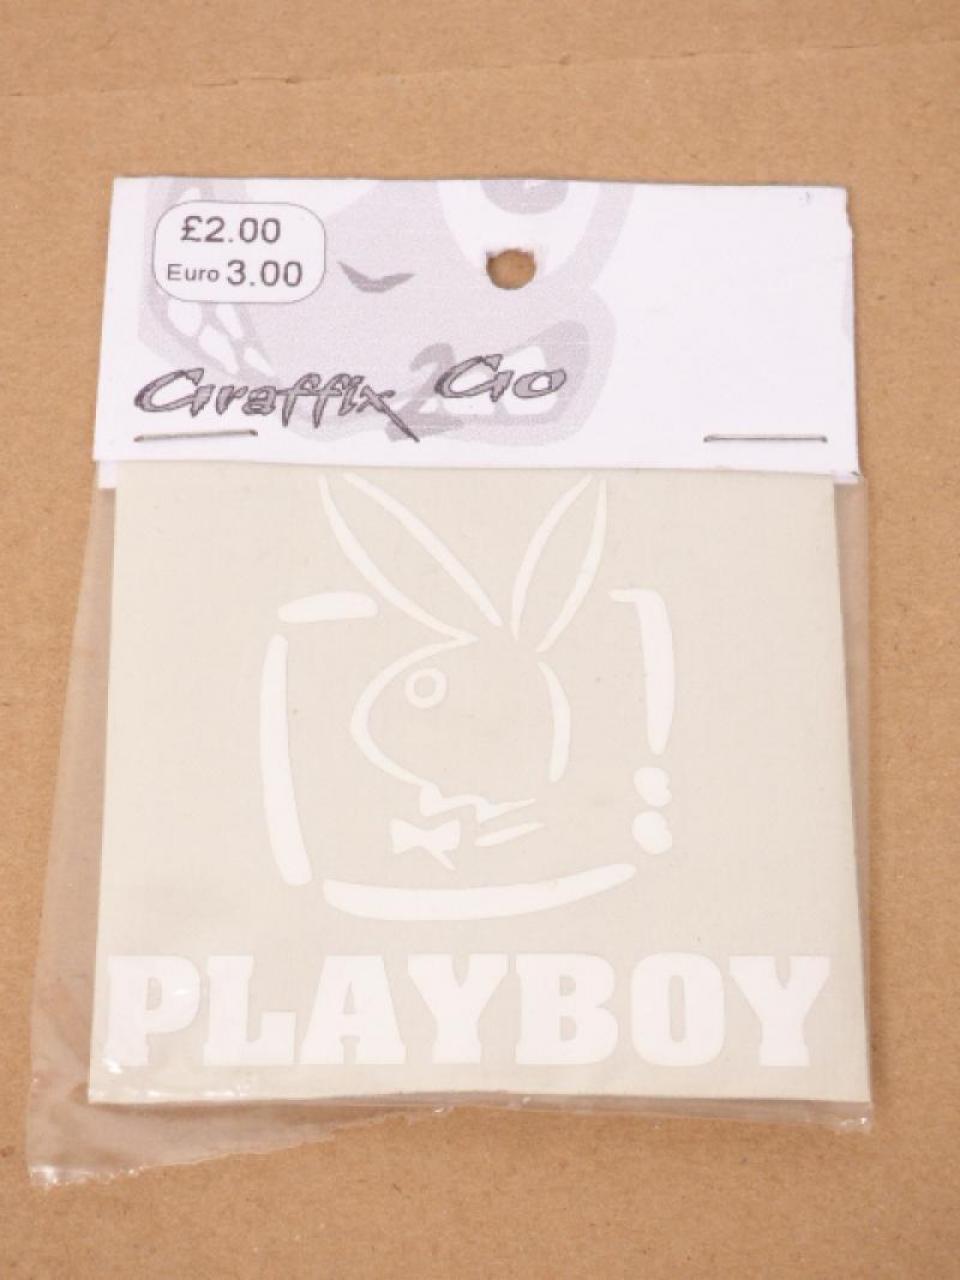 Autocollant stickers Play boy blanc lapin noeud  hot scooter pour moto Neuf